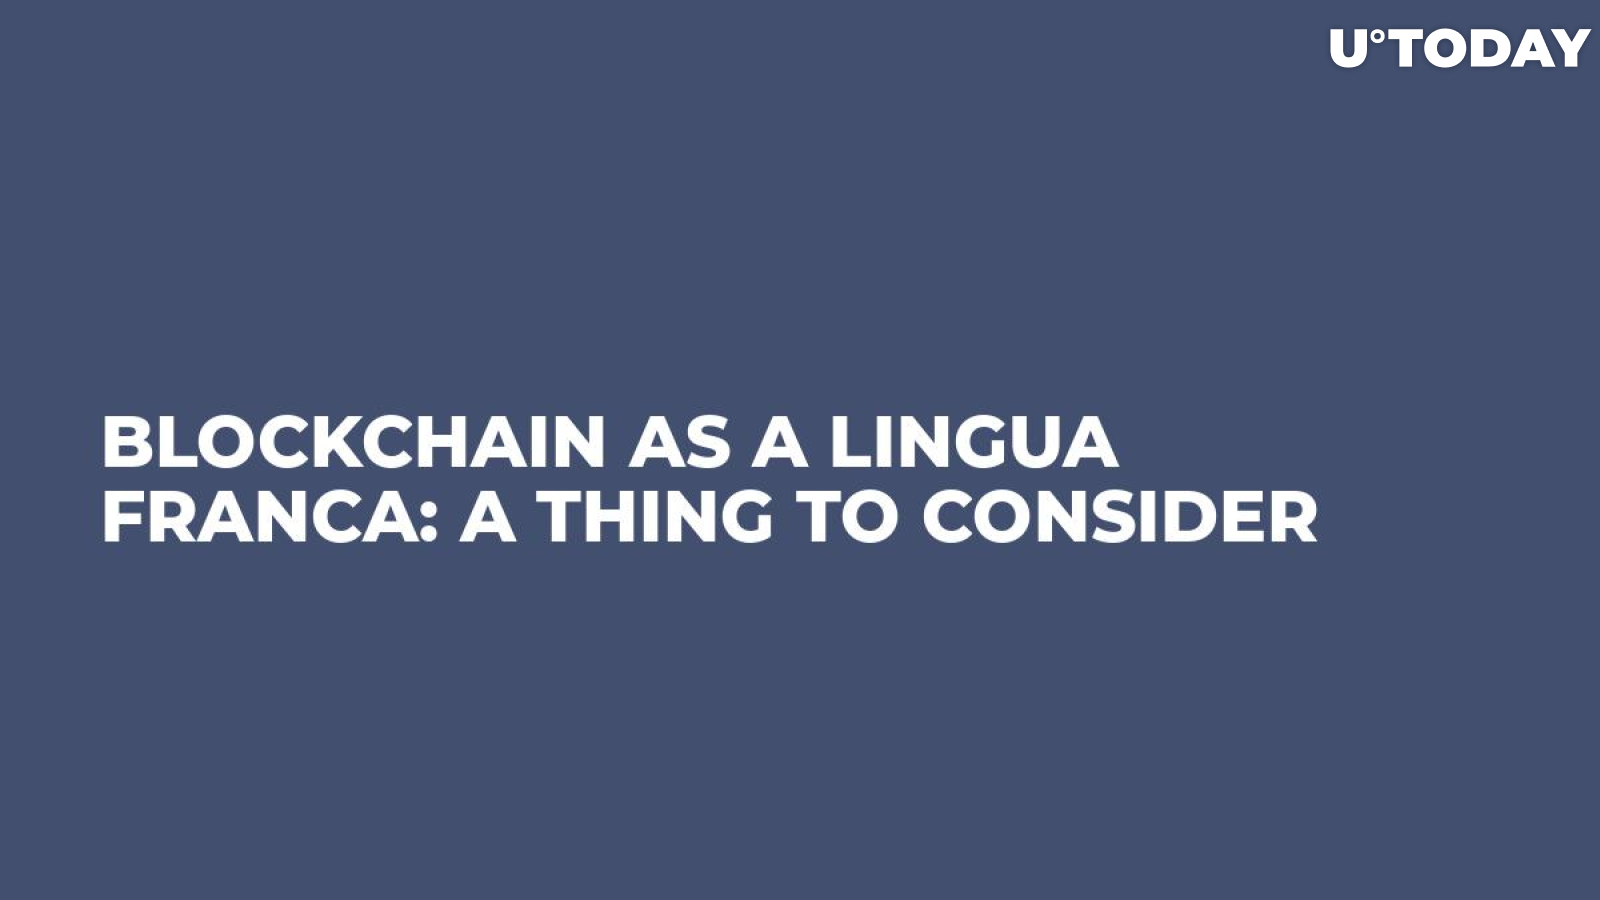 Blockchain As a Lingua Franca: A Thing to Consider